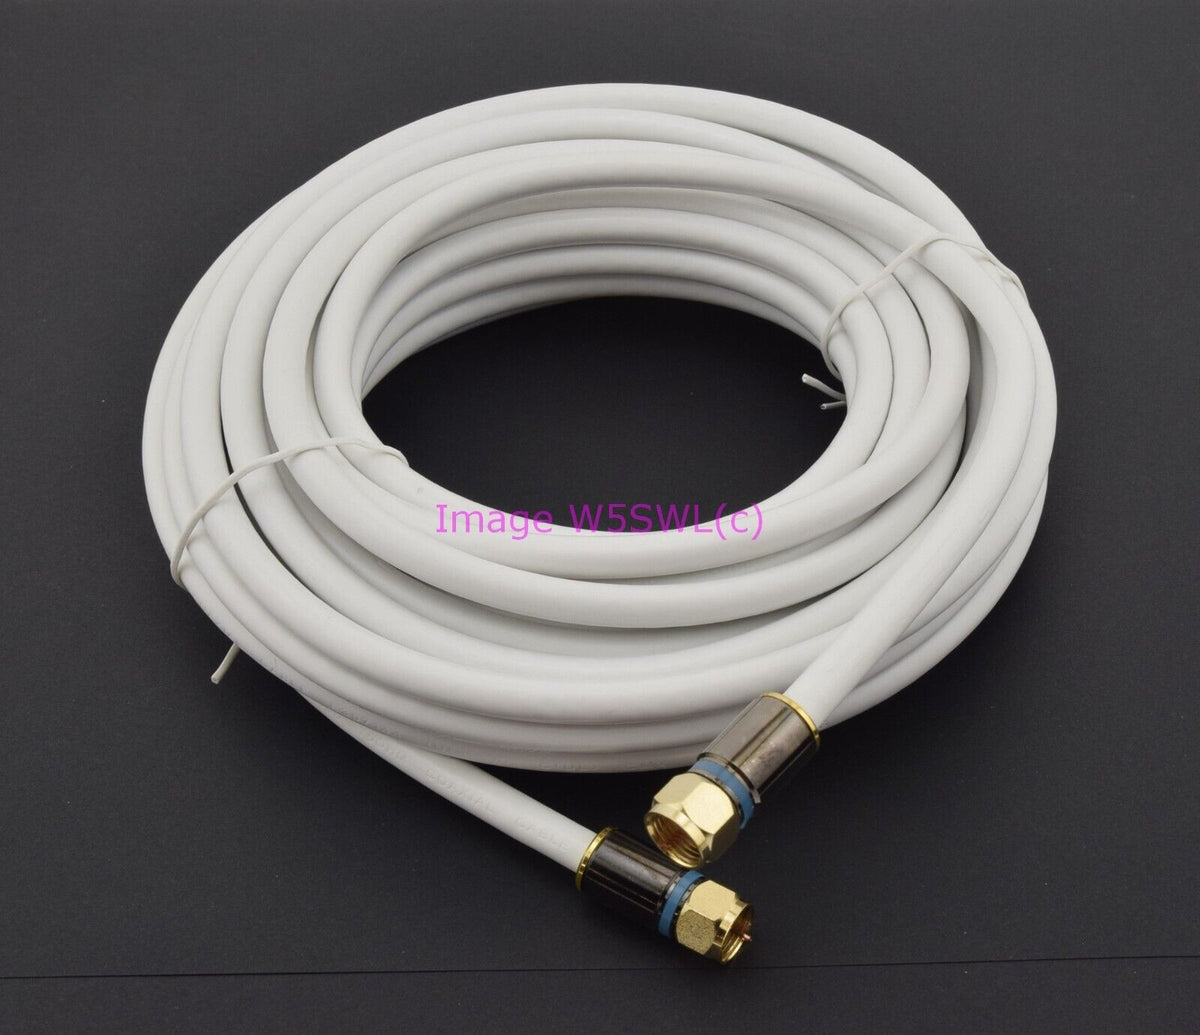 25ft 7.6m RG-6 Coaxial Cable for Sat CATV HDTV Stereo TV 75 Ohm White - Dave's Hobby Shop by W5SWL